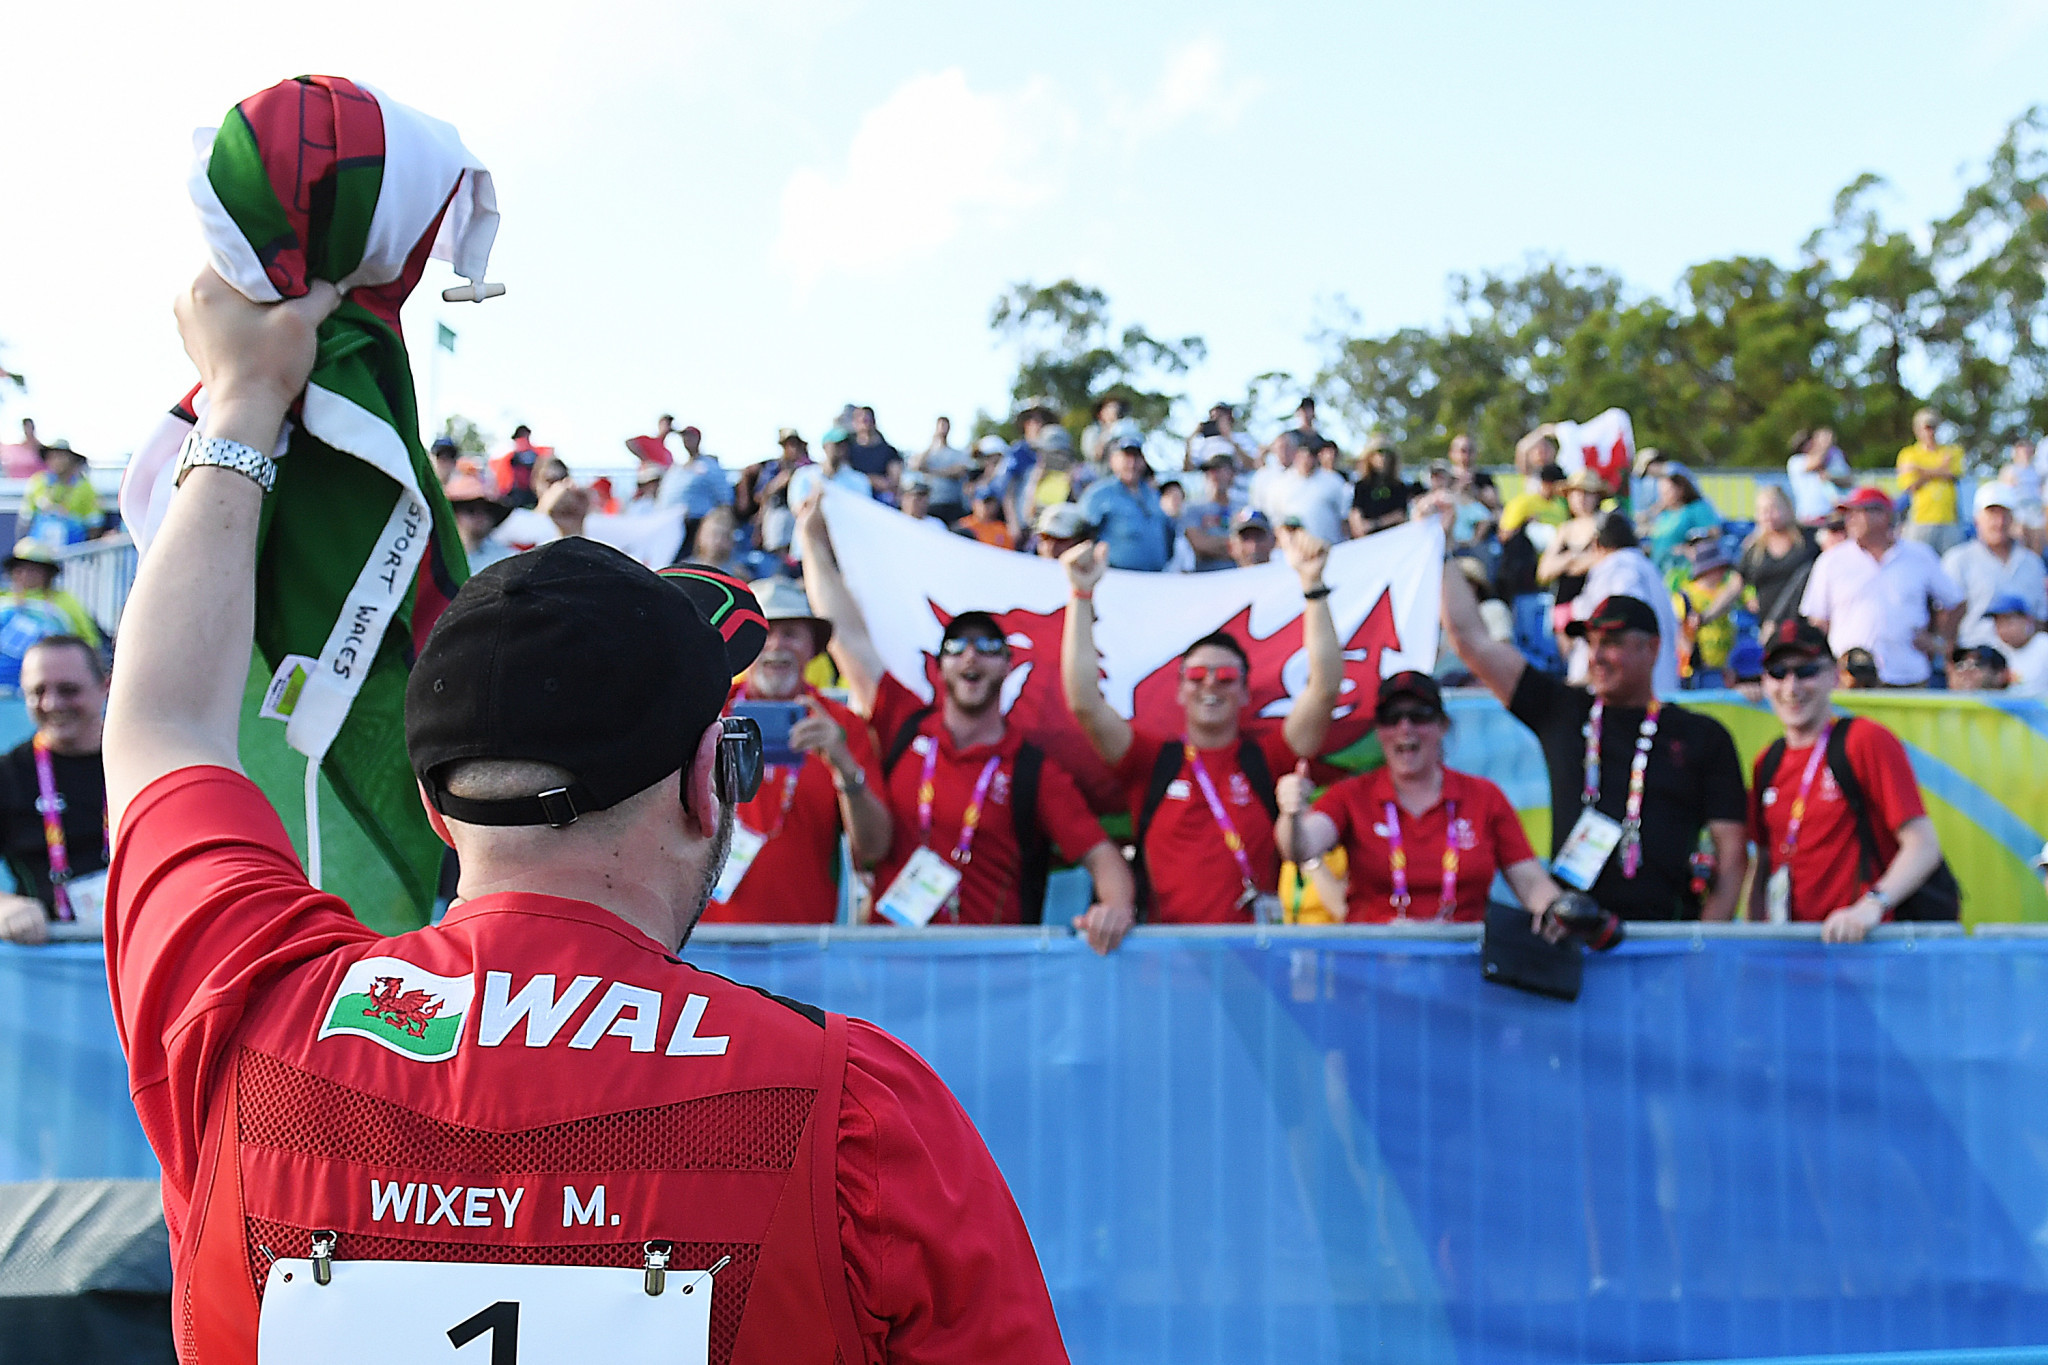 Welshman Michael Wixey broke the Commonwealth Games record to win the men's trap title ©Getty Images